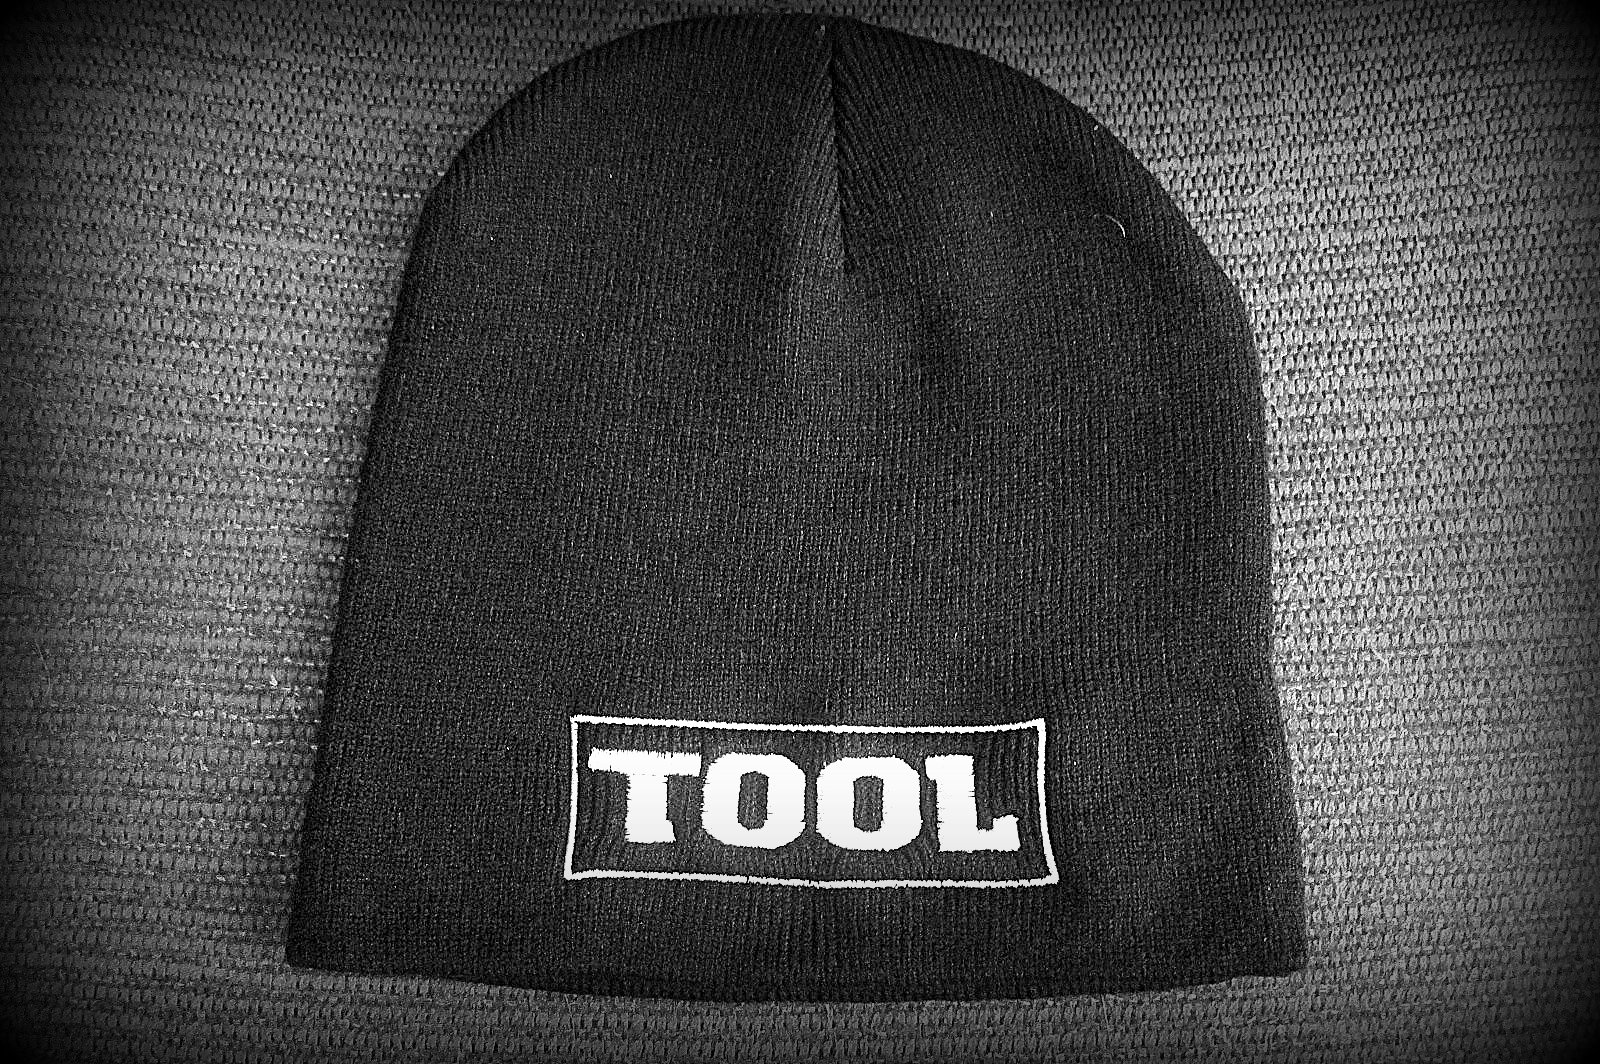 TOOL-Embroidered - Logo Beanie - Stretchy 100% acrylic fabric provides a one-size-fits-all . Soft and light-weight beanie with slightly ribbed knit texture